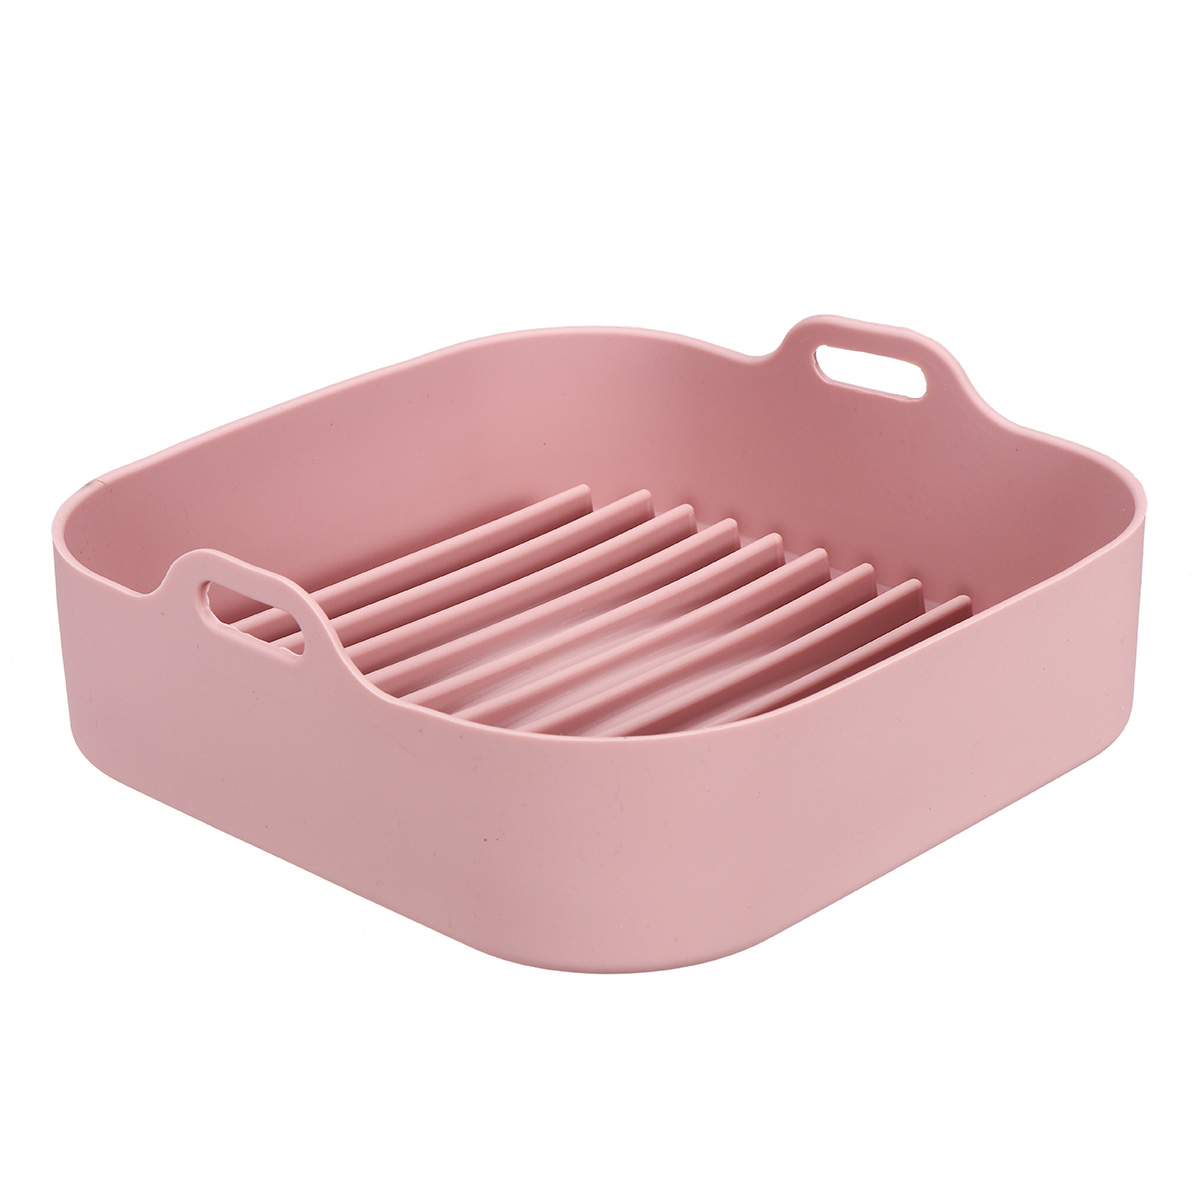 Multifunctional-Silicone-Baking-Tray-High-Temperature-Resistant-Non-stick-Bread-Fried-Baking-Pan-wit-1864776-17